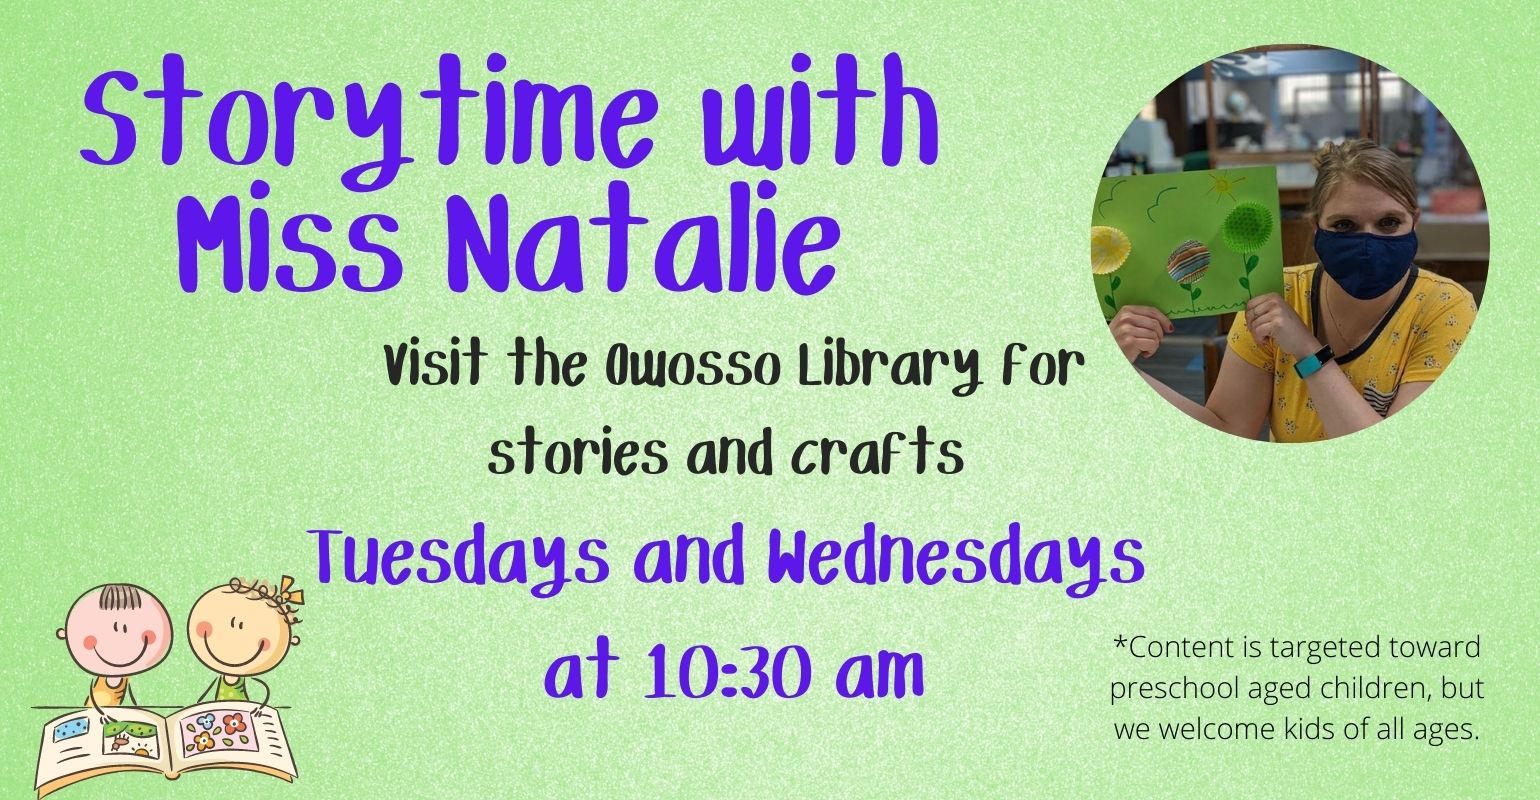 flyer for storytime